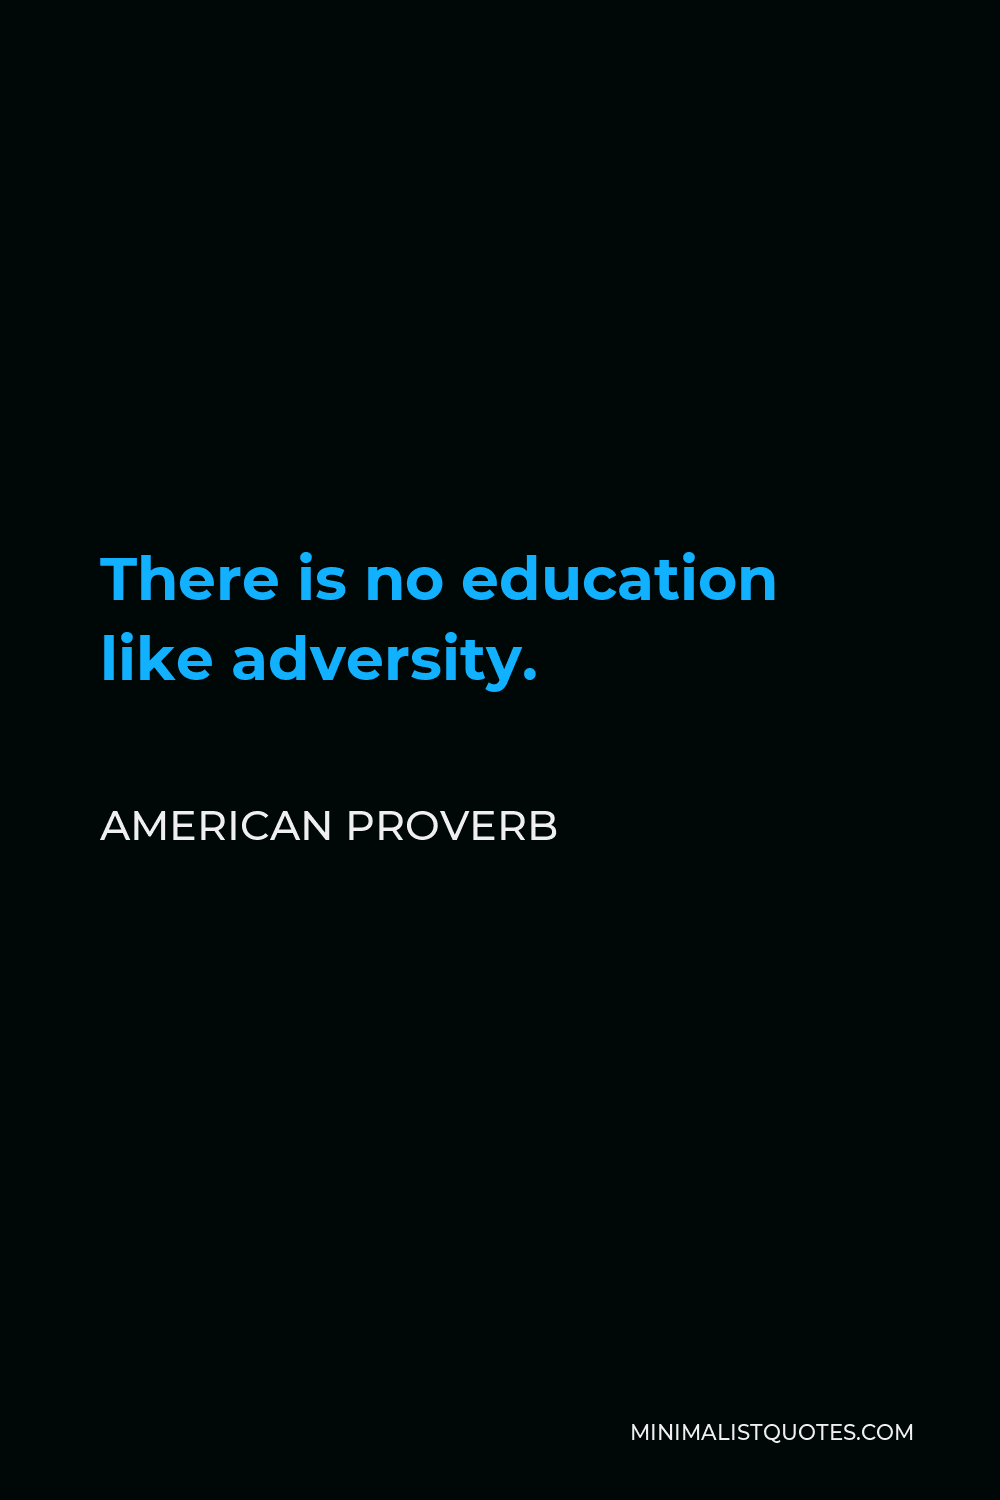 American Proverb Quote - There is no education like adversity.